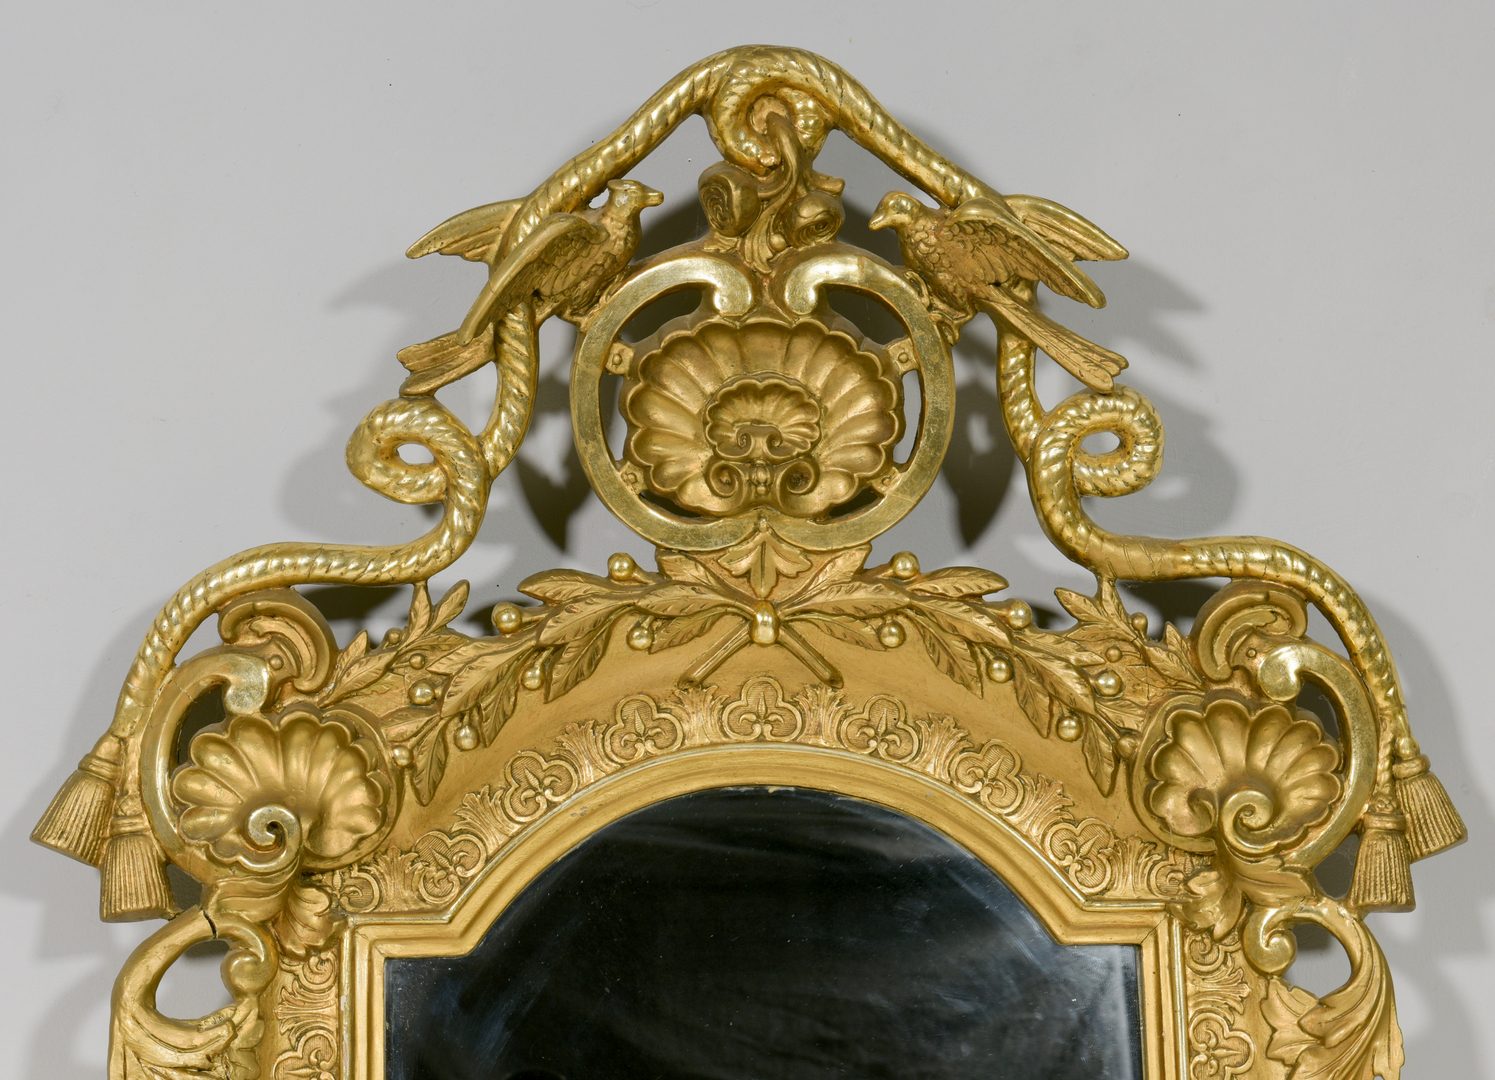 Lot 591: French Carved Gilt Wall Mirror